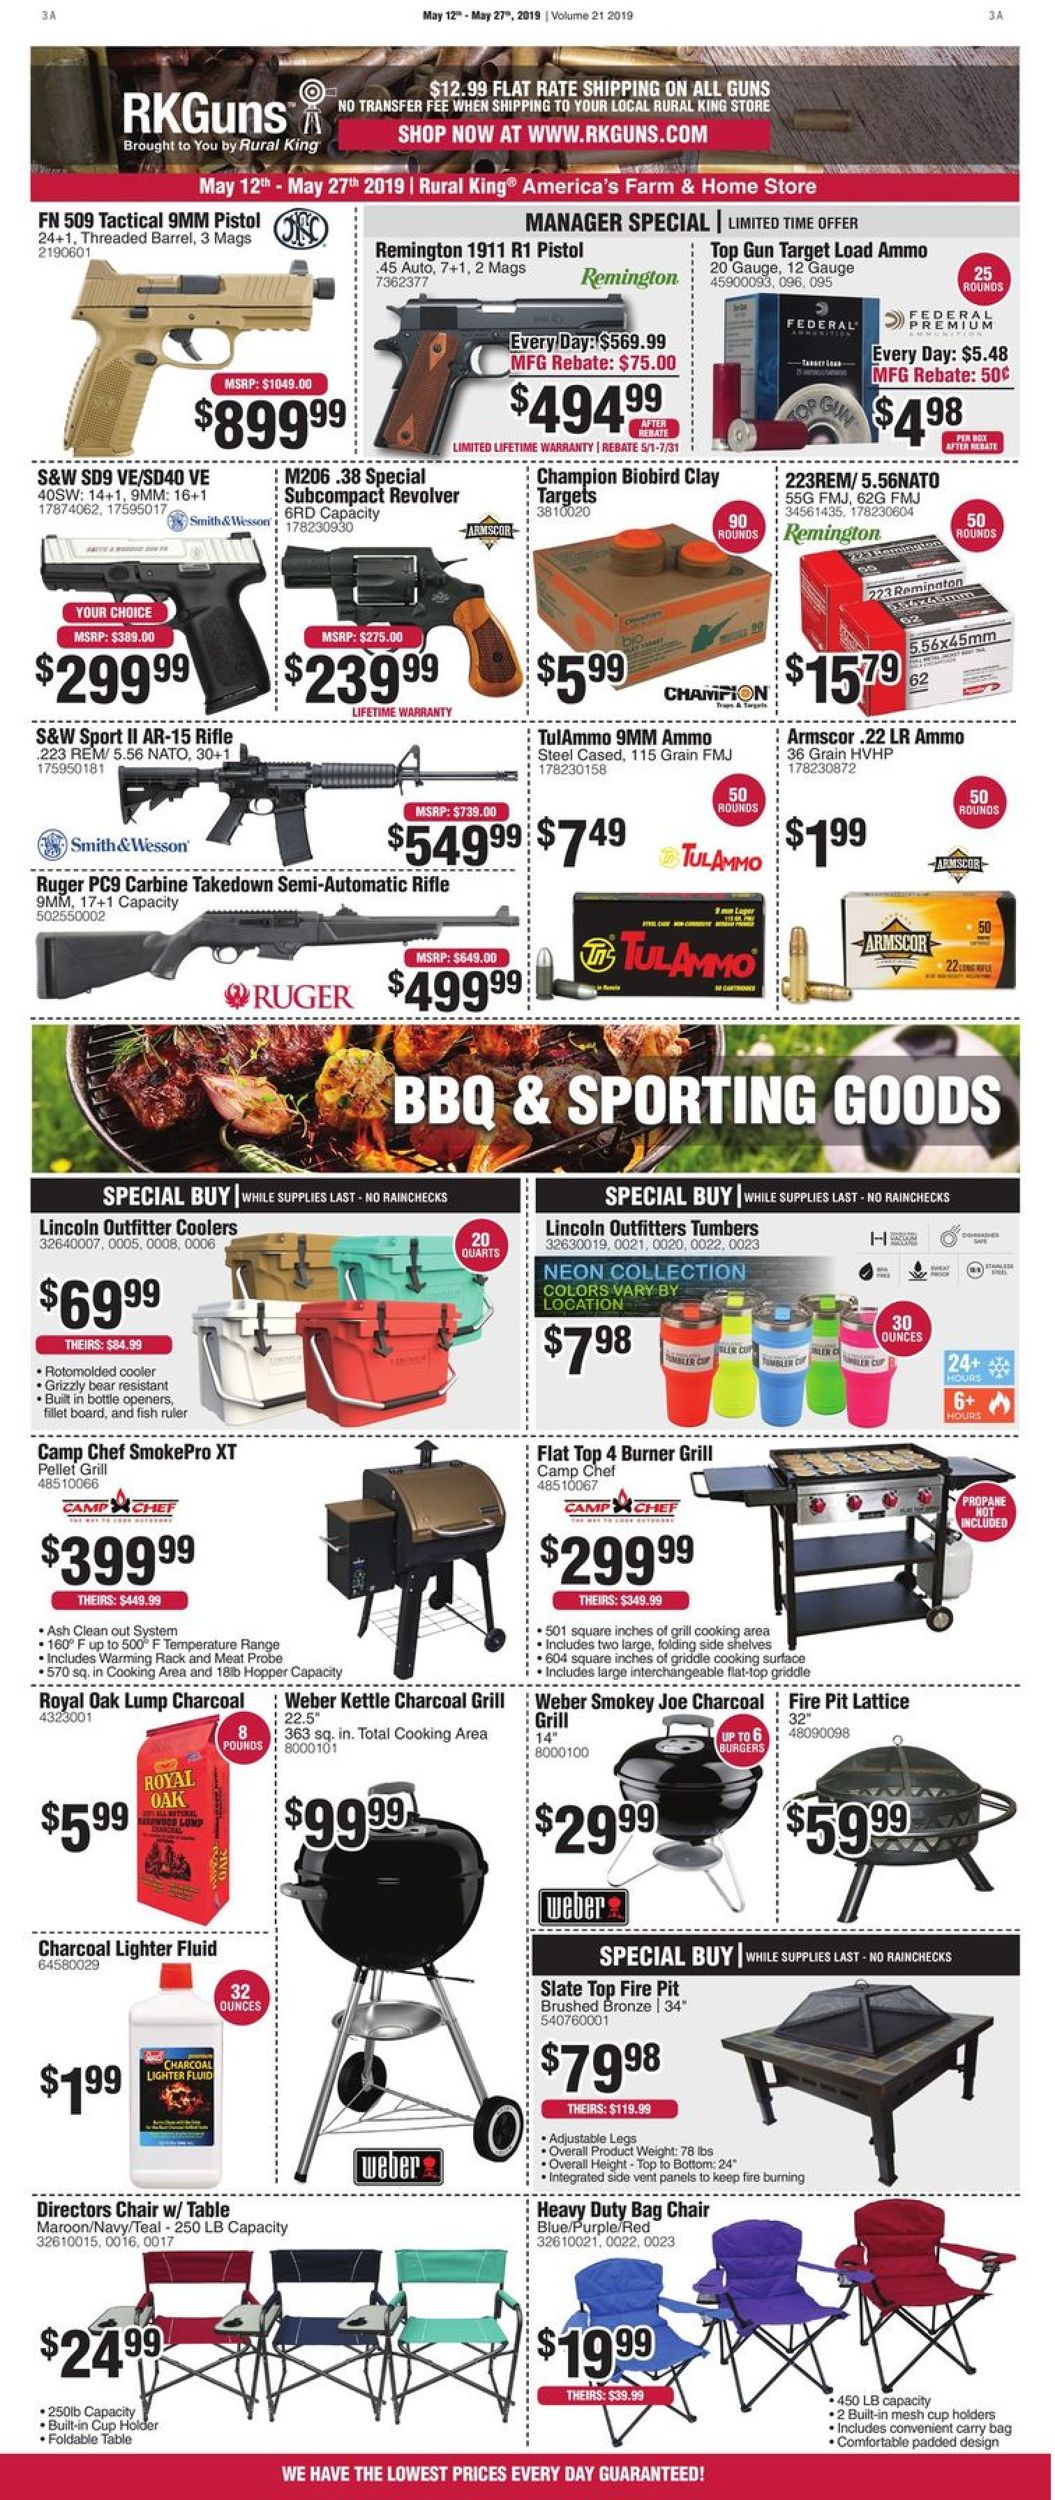 Rural King Cur Weekly Ad 05 12, Rural King Fire Pit Grill